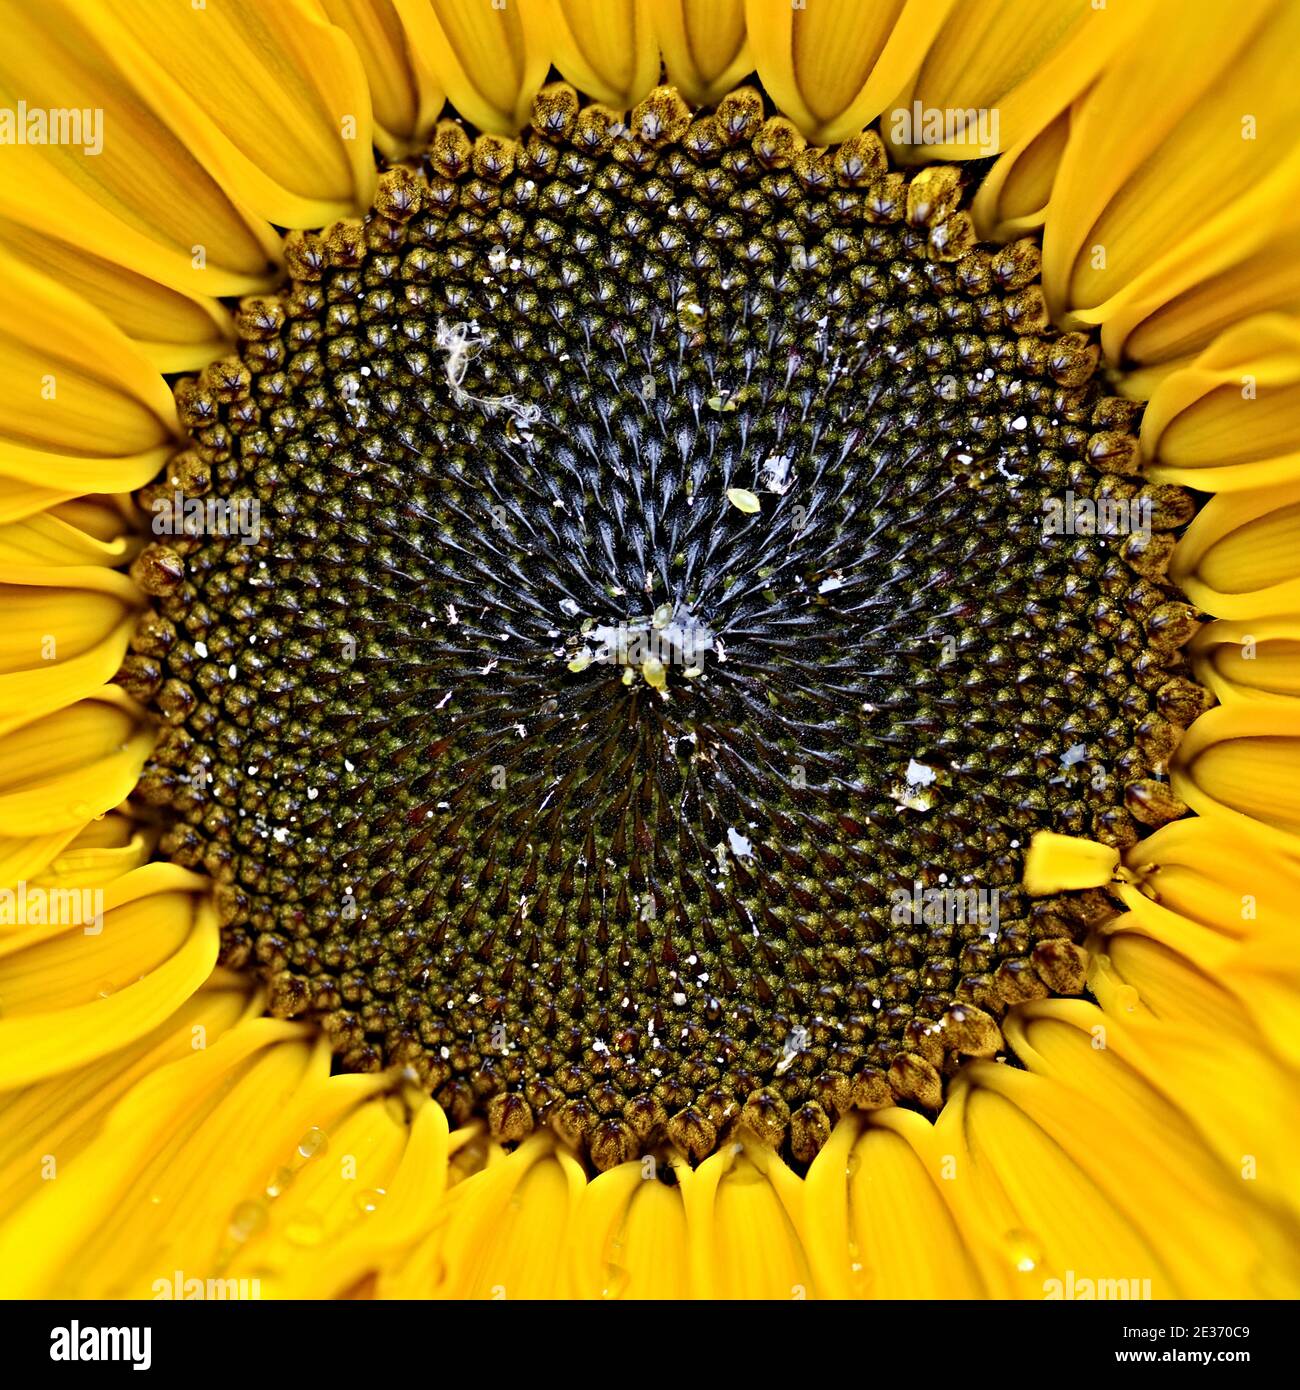 Sunflower close up view. Yellow petals and center full of ripe seeds. Stock Photo